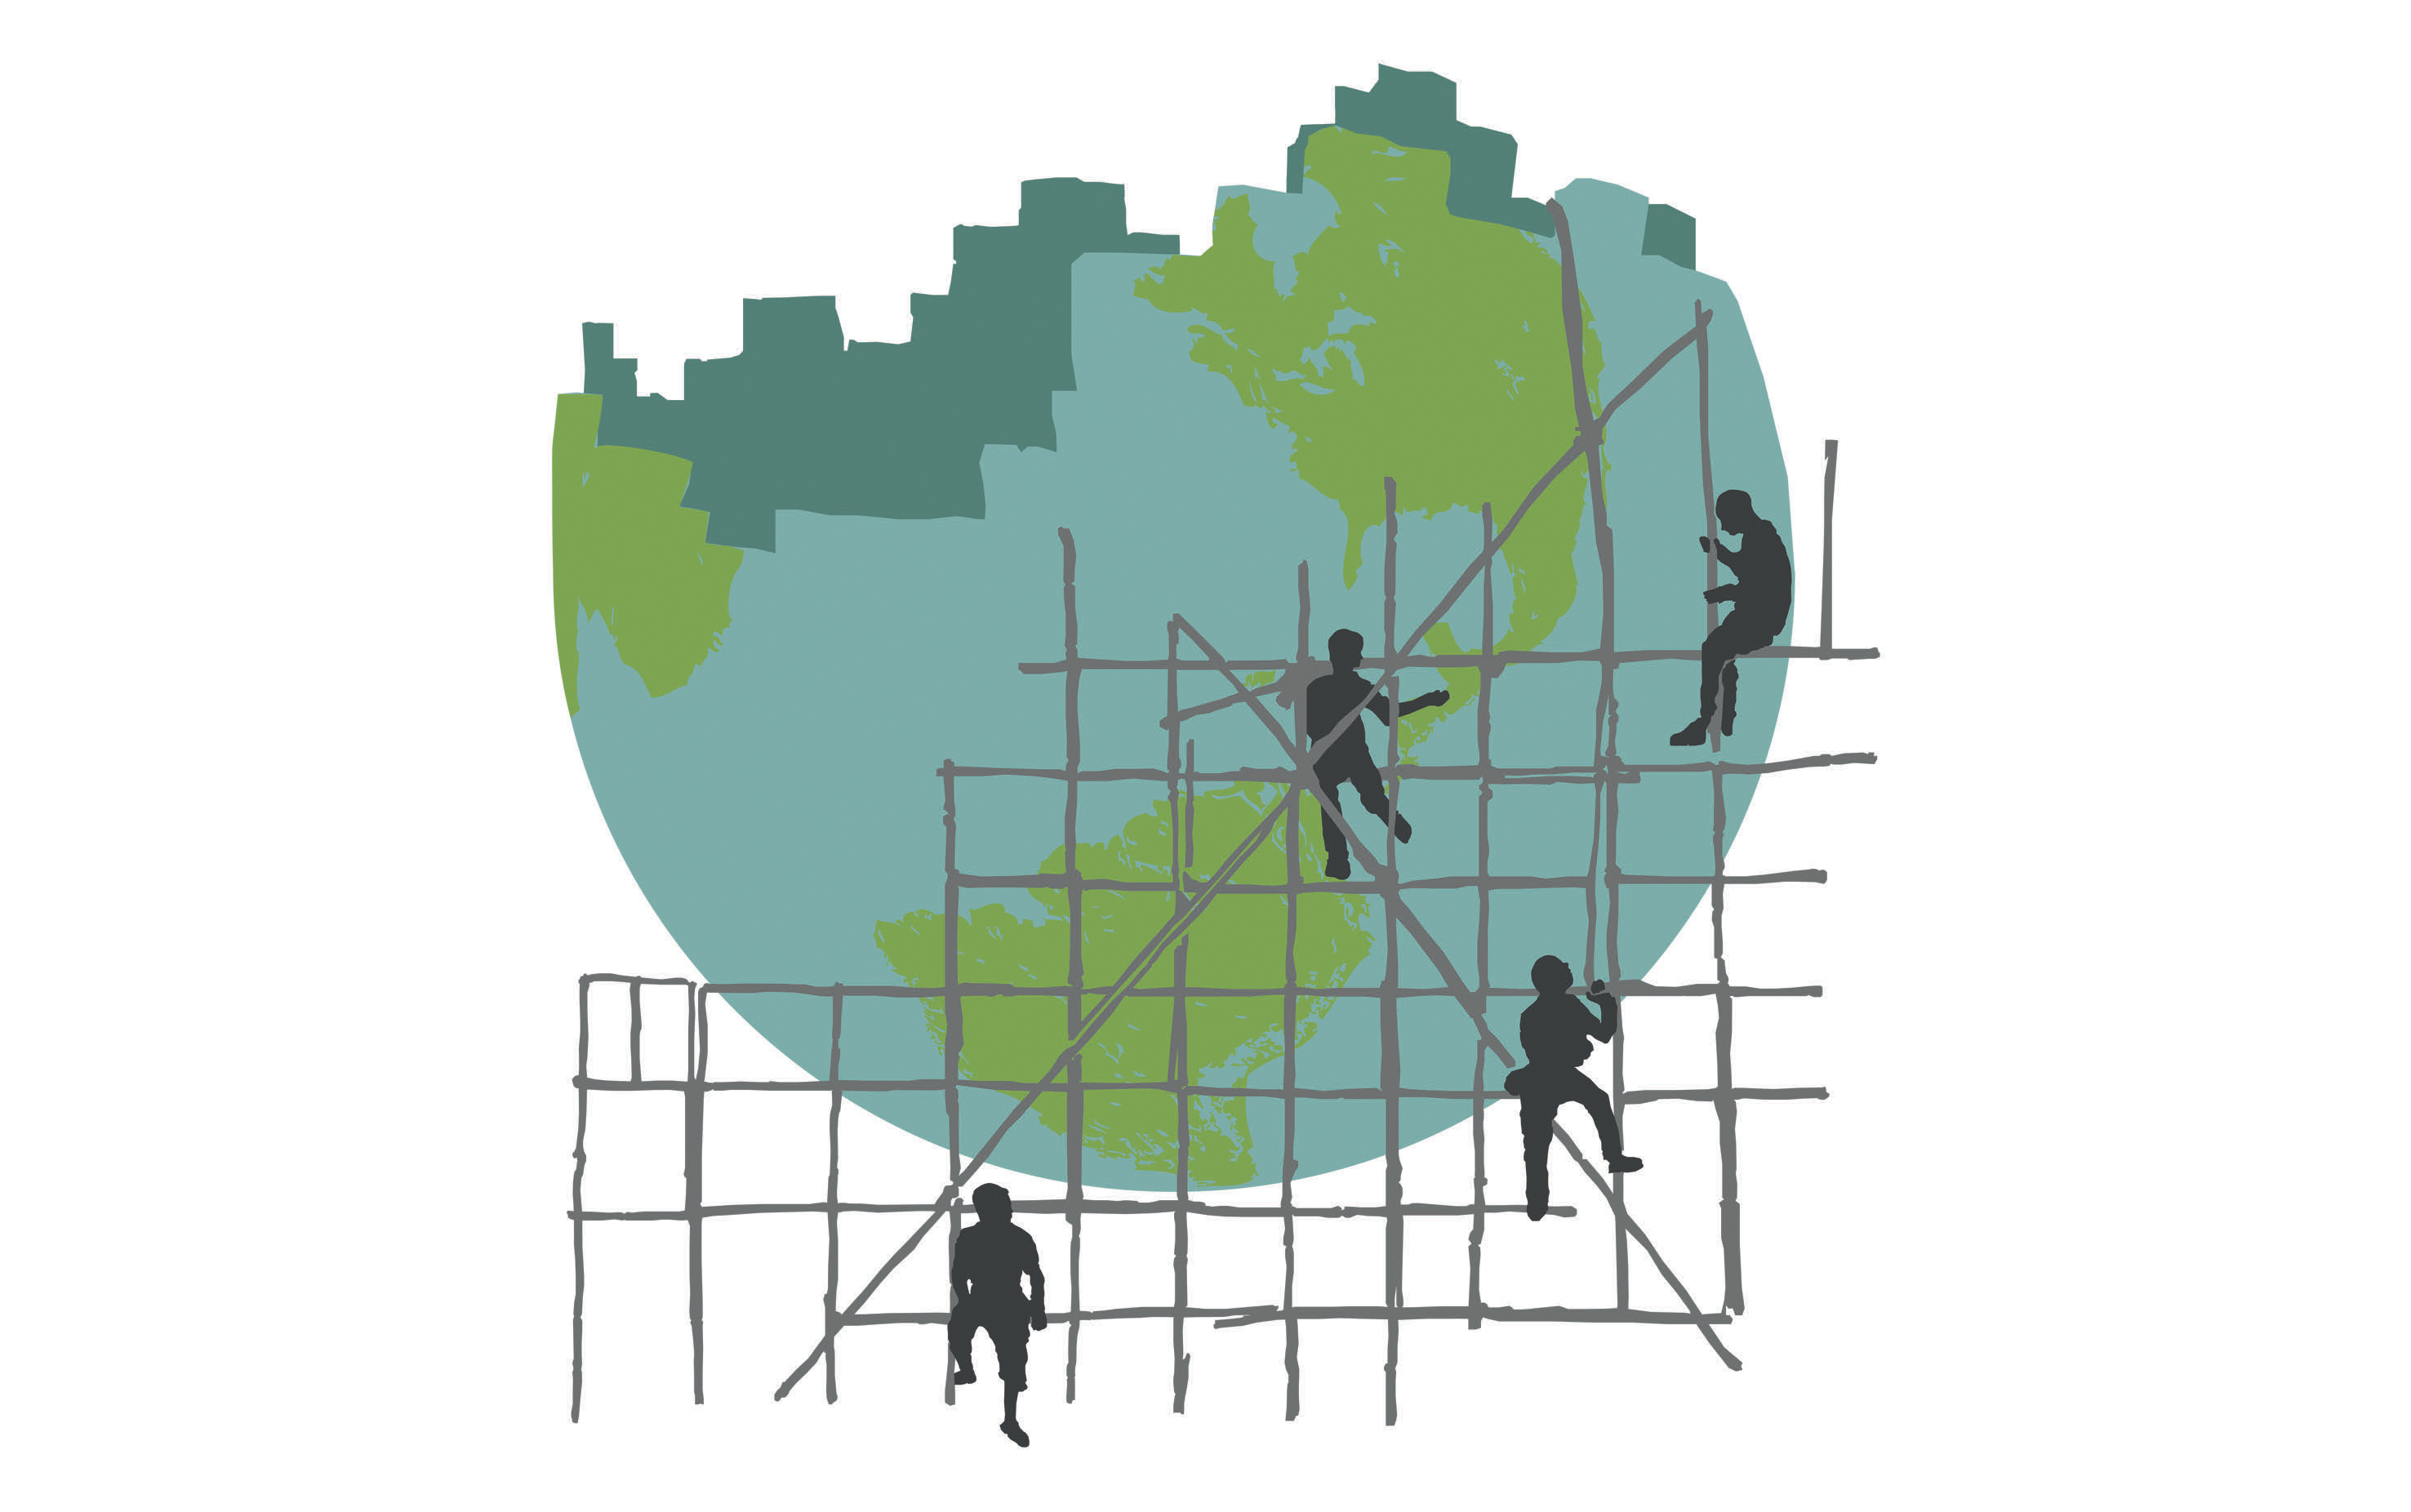 Silhouettes of people on scaffolding with the Earth in the background